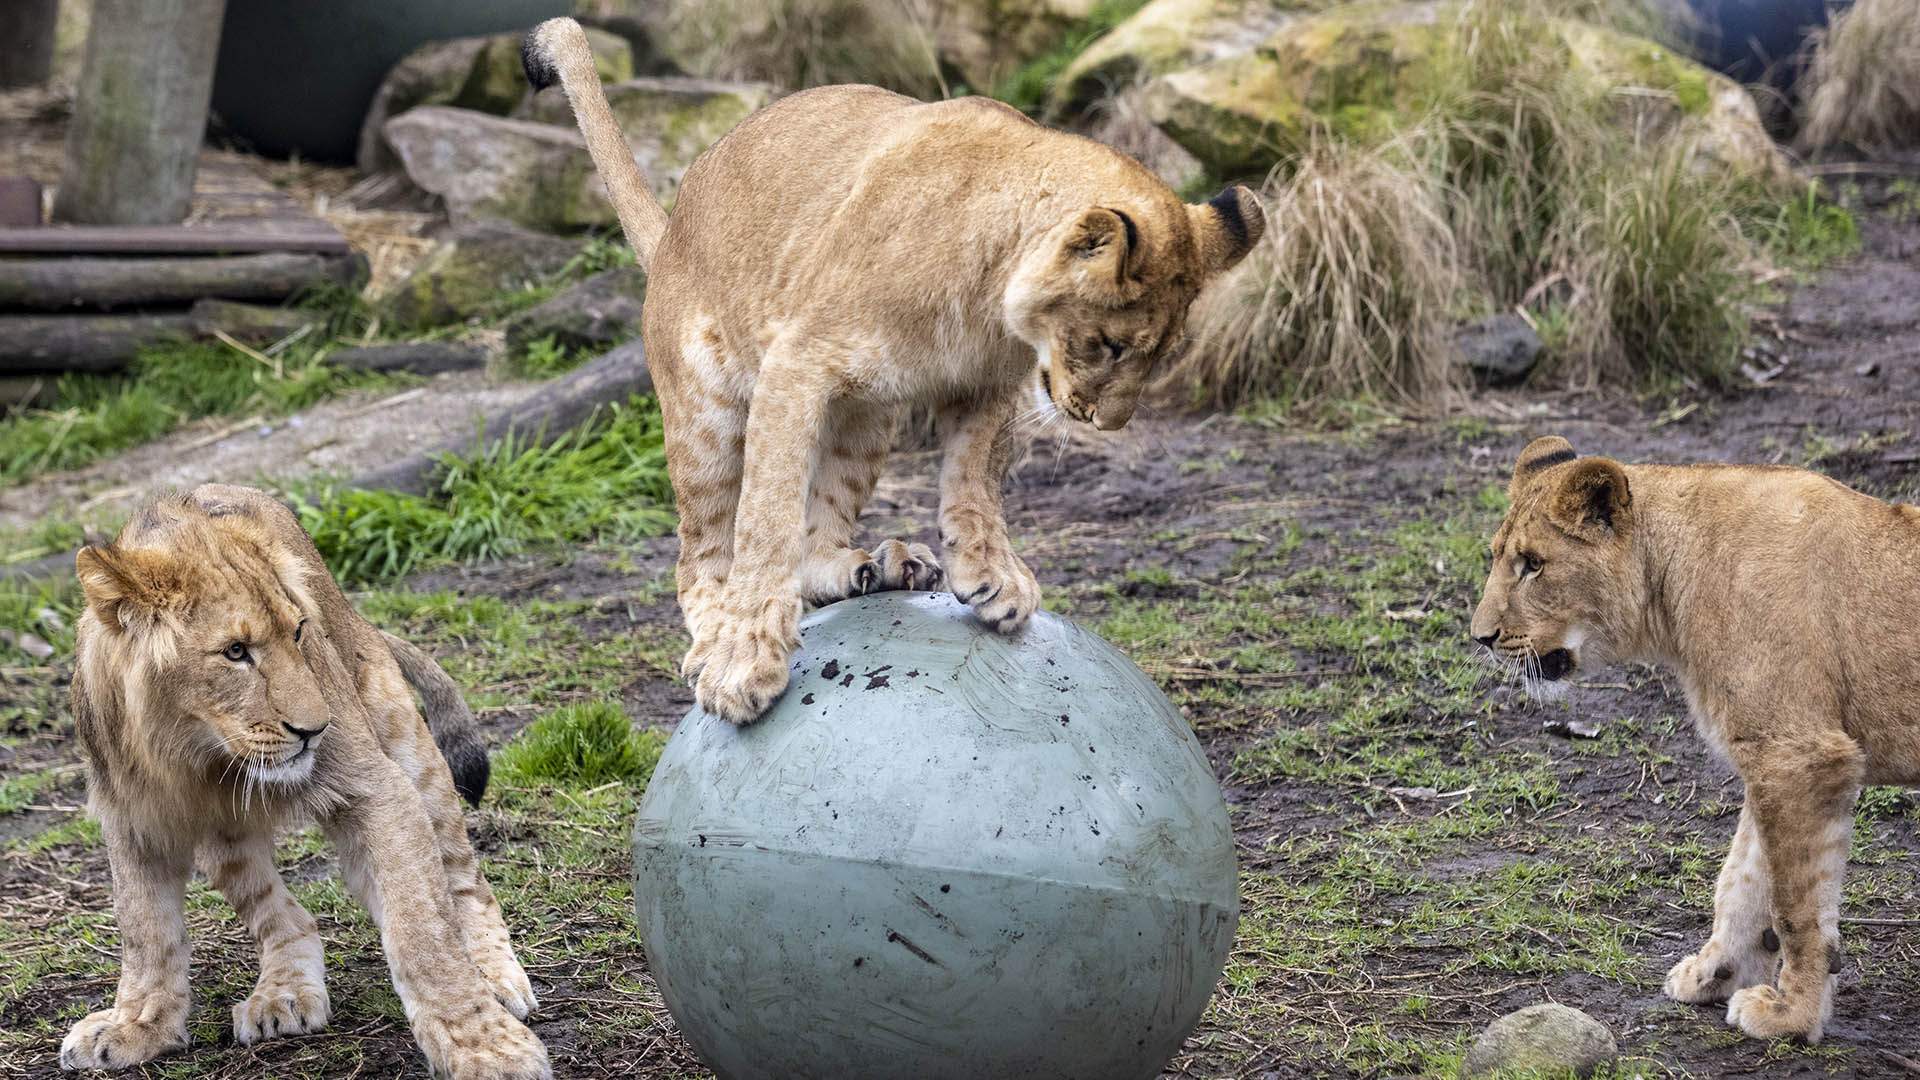 Taronga Zoo Will Still Operate As Normal Today After Five Lions Escaped Their Enclosure